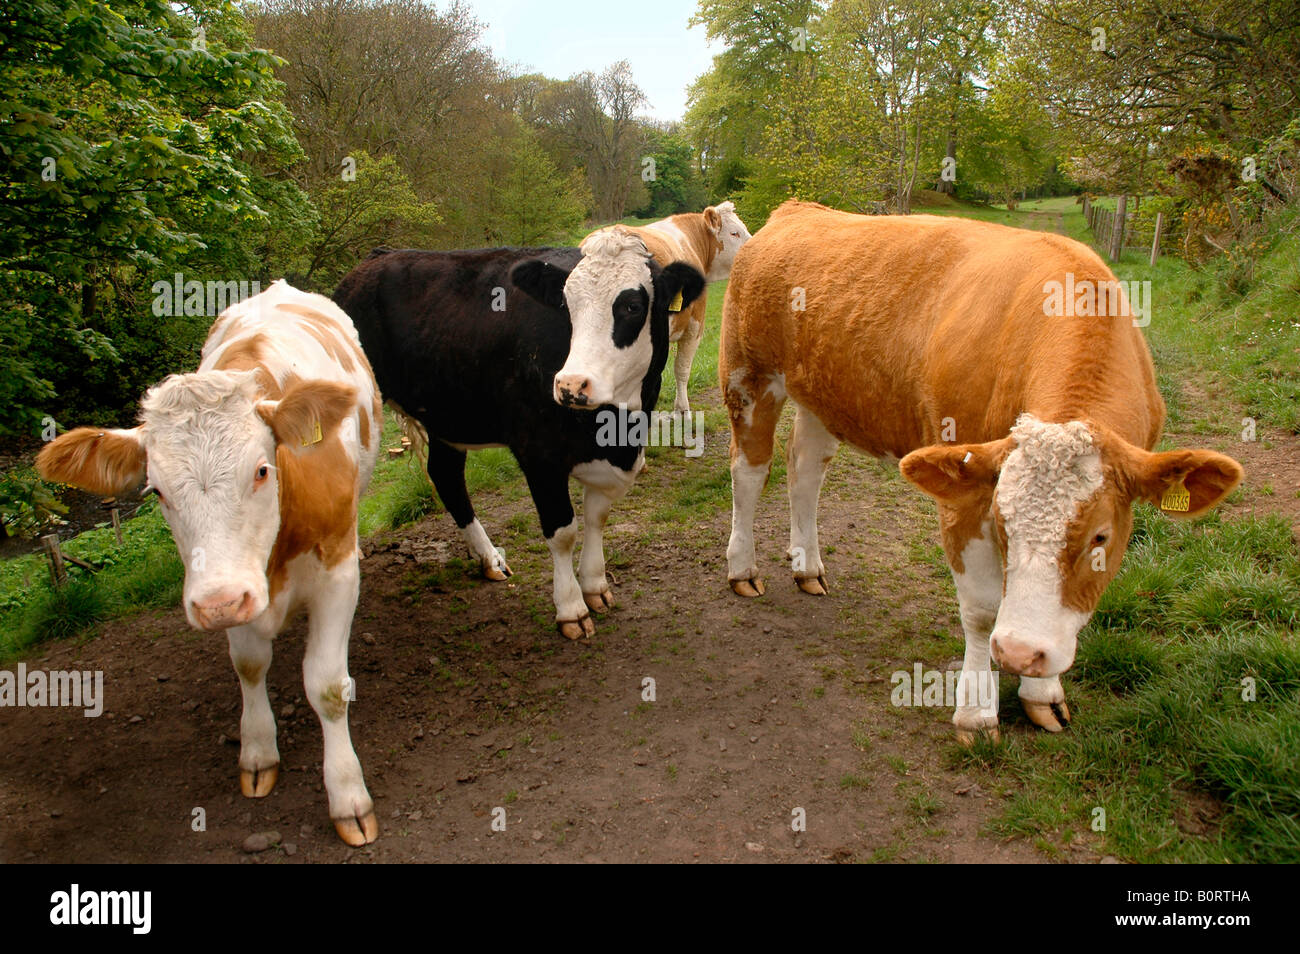 A group of young black/white and tan/white cows standing in a field surrounded by spring trees. Stock Photo